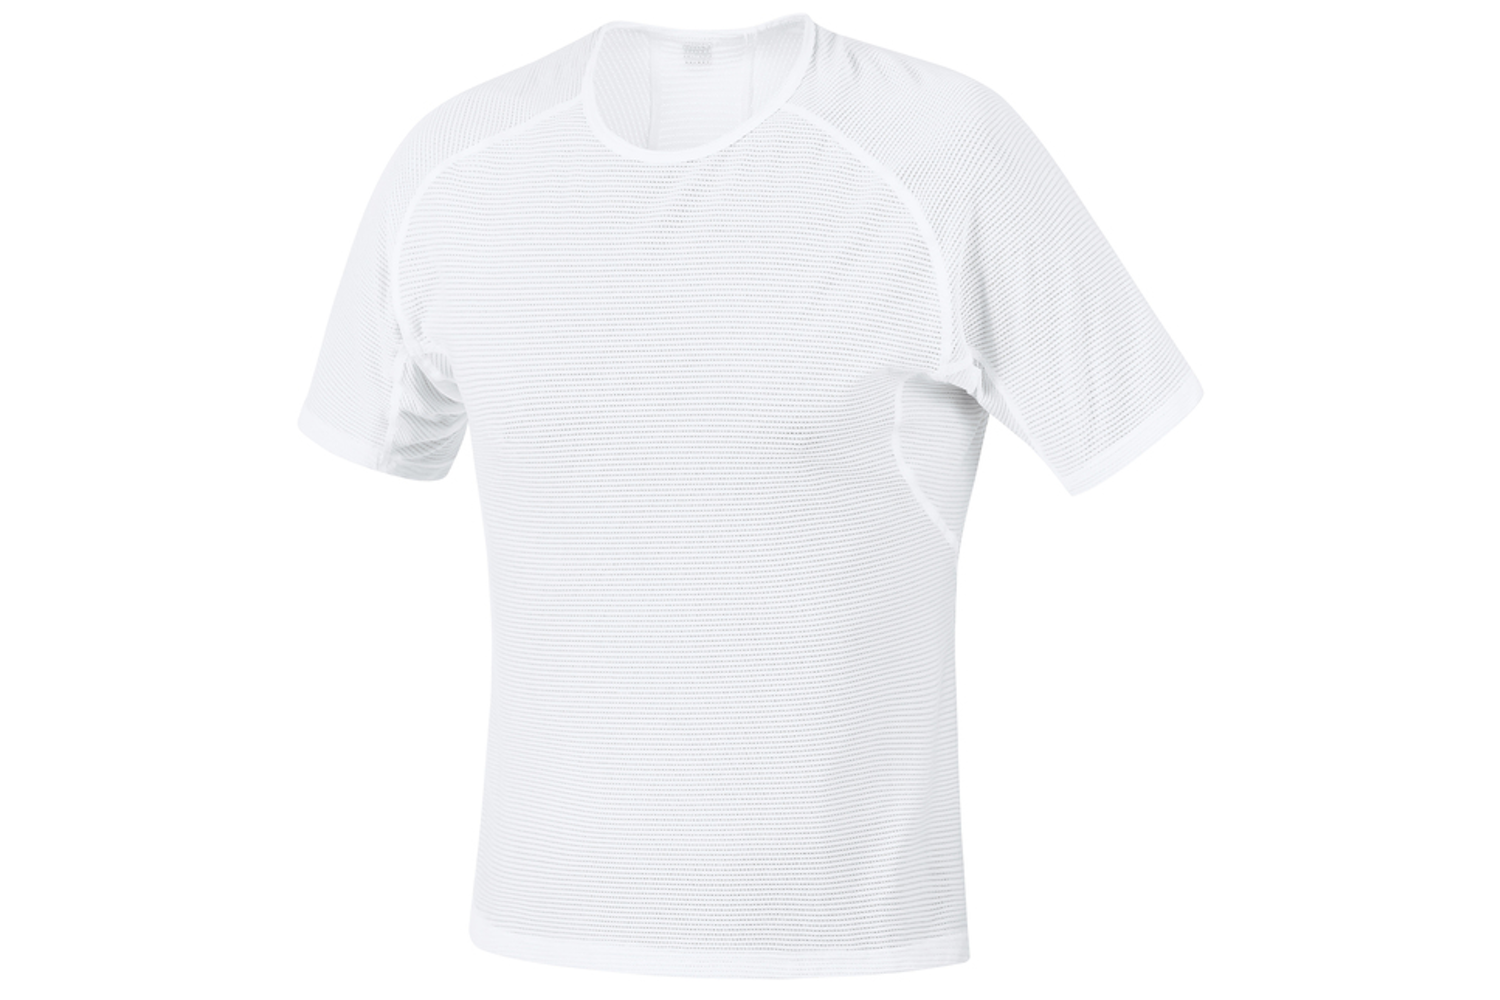 Gore M Base Layer shirt review | Cycling Weekly